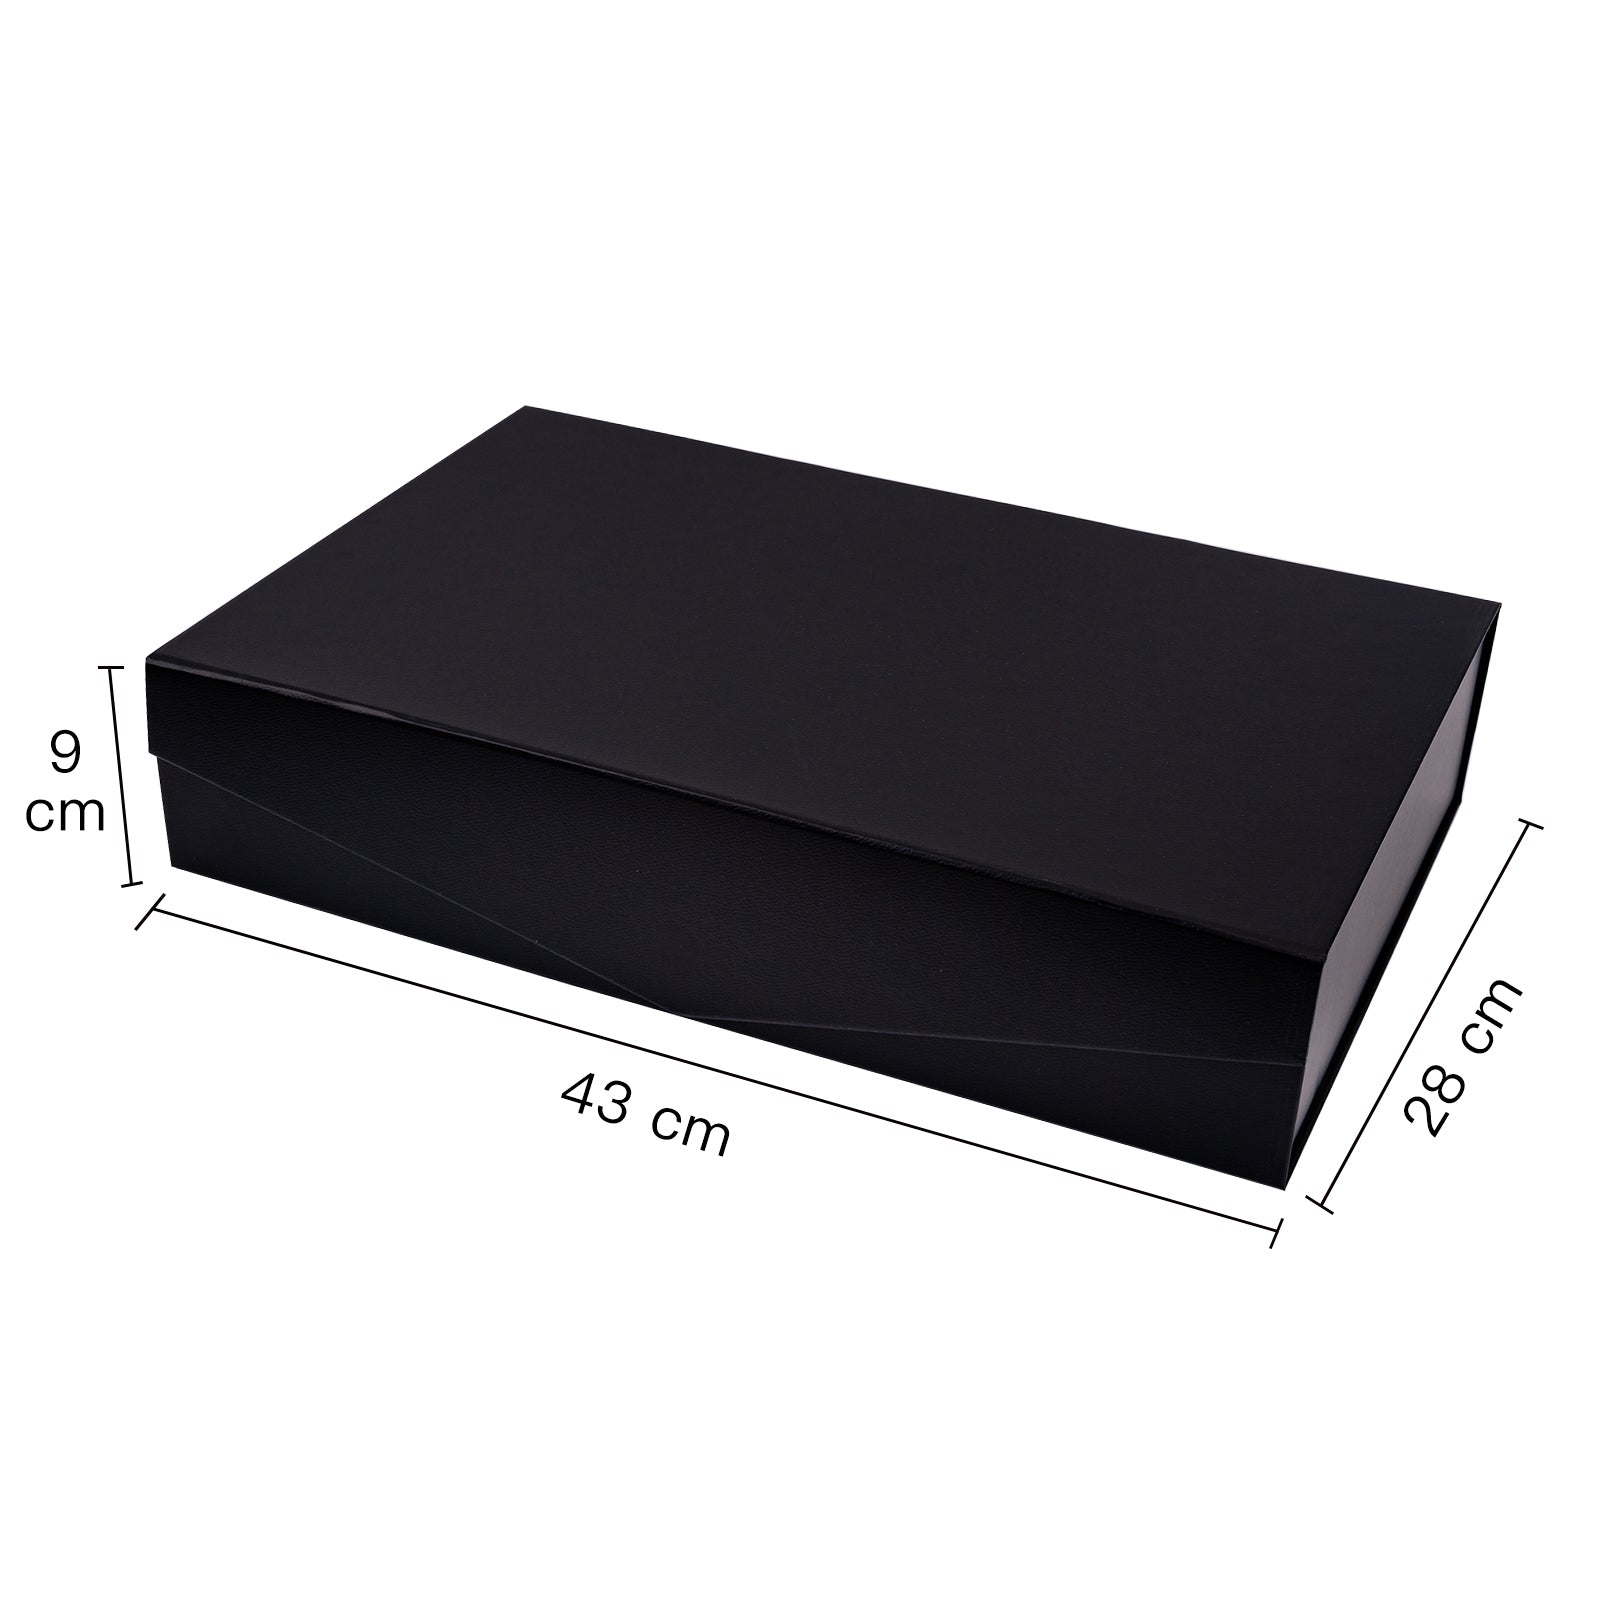 16.9x11x3.5 inch Collapsible Gift Box with Magnetic Closure